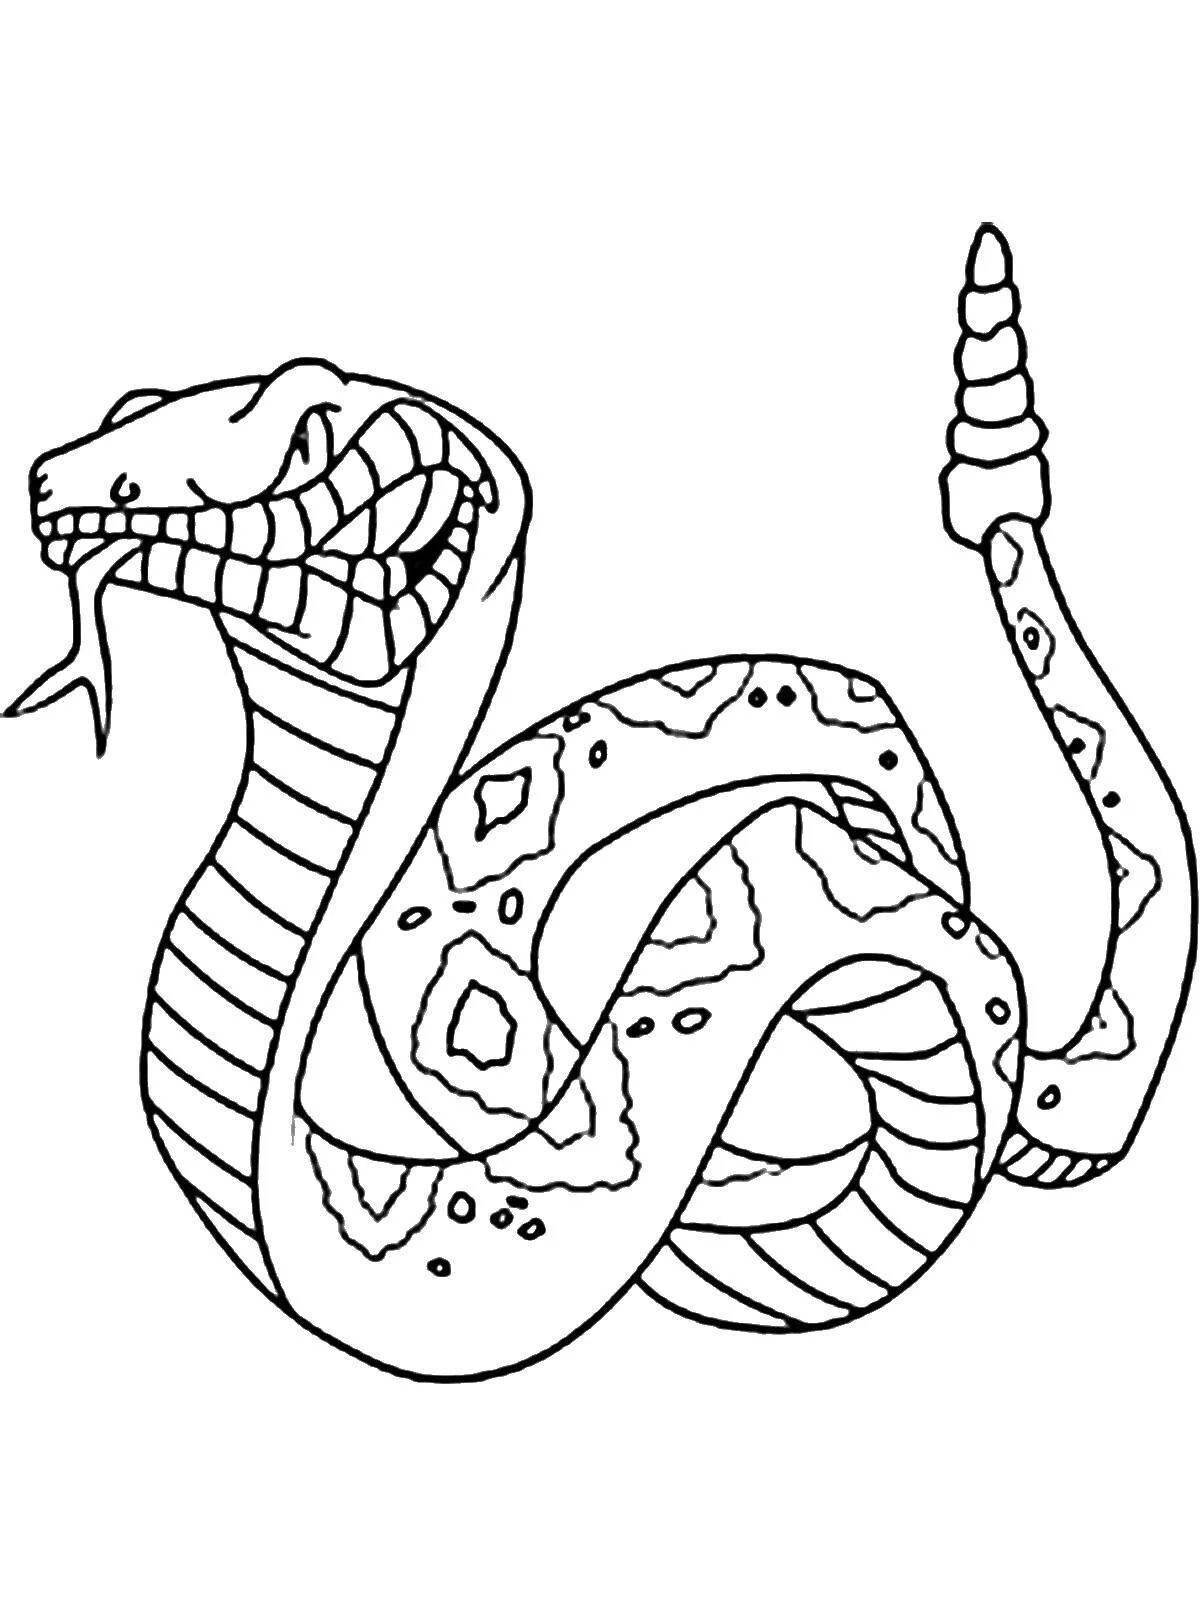 Adorable reptile coloring pages